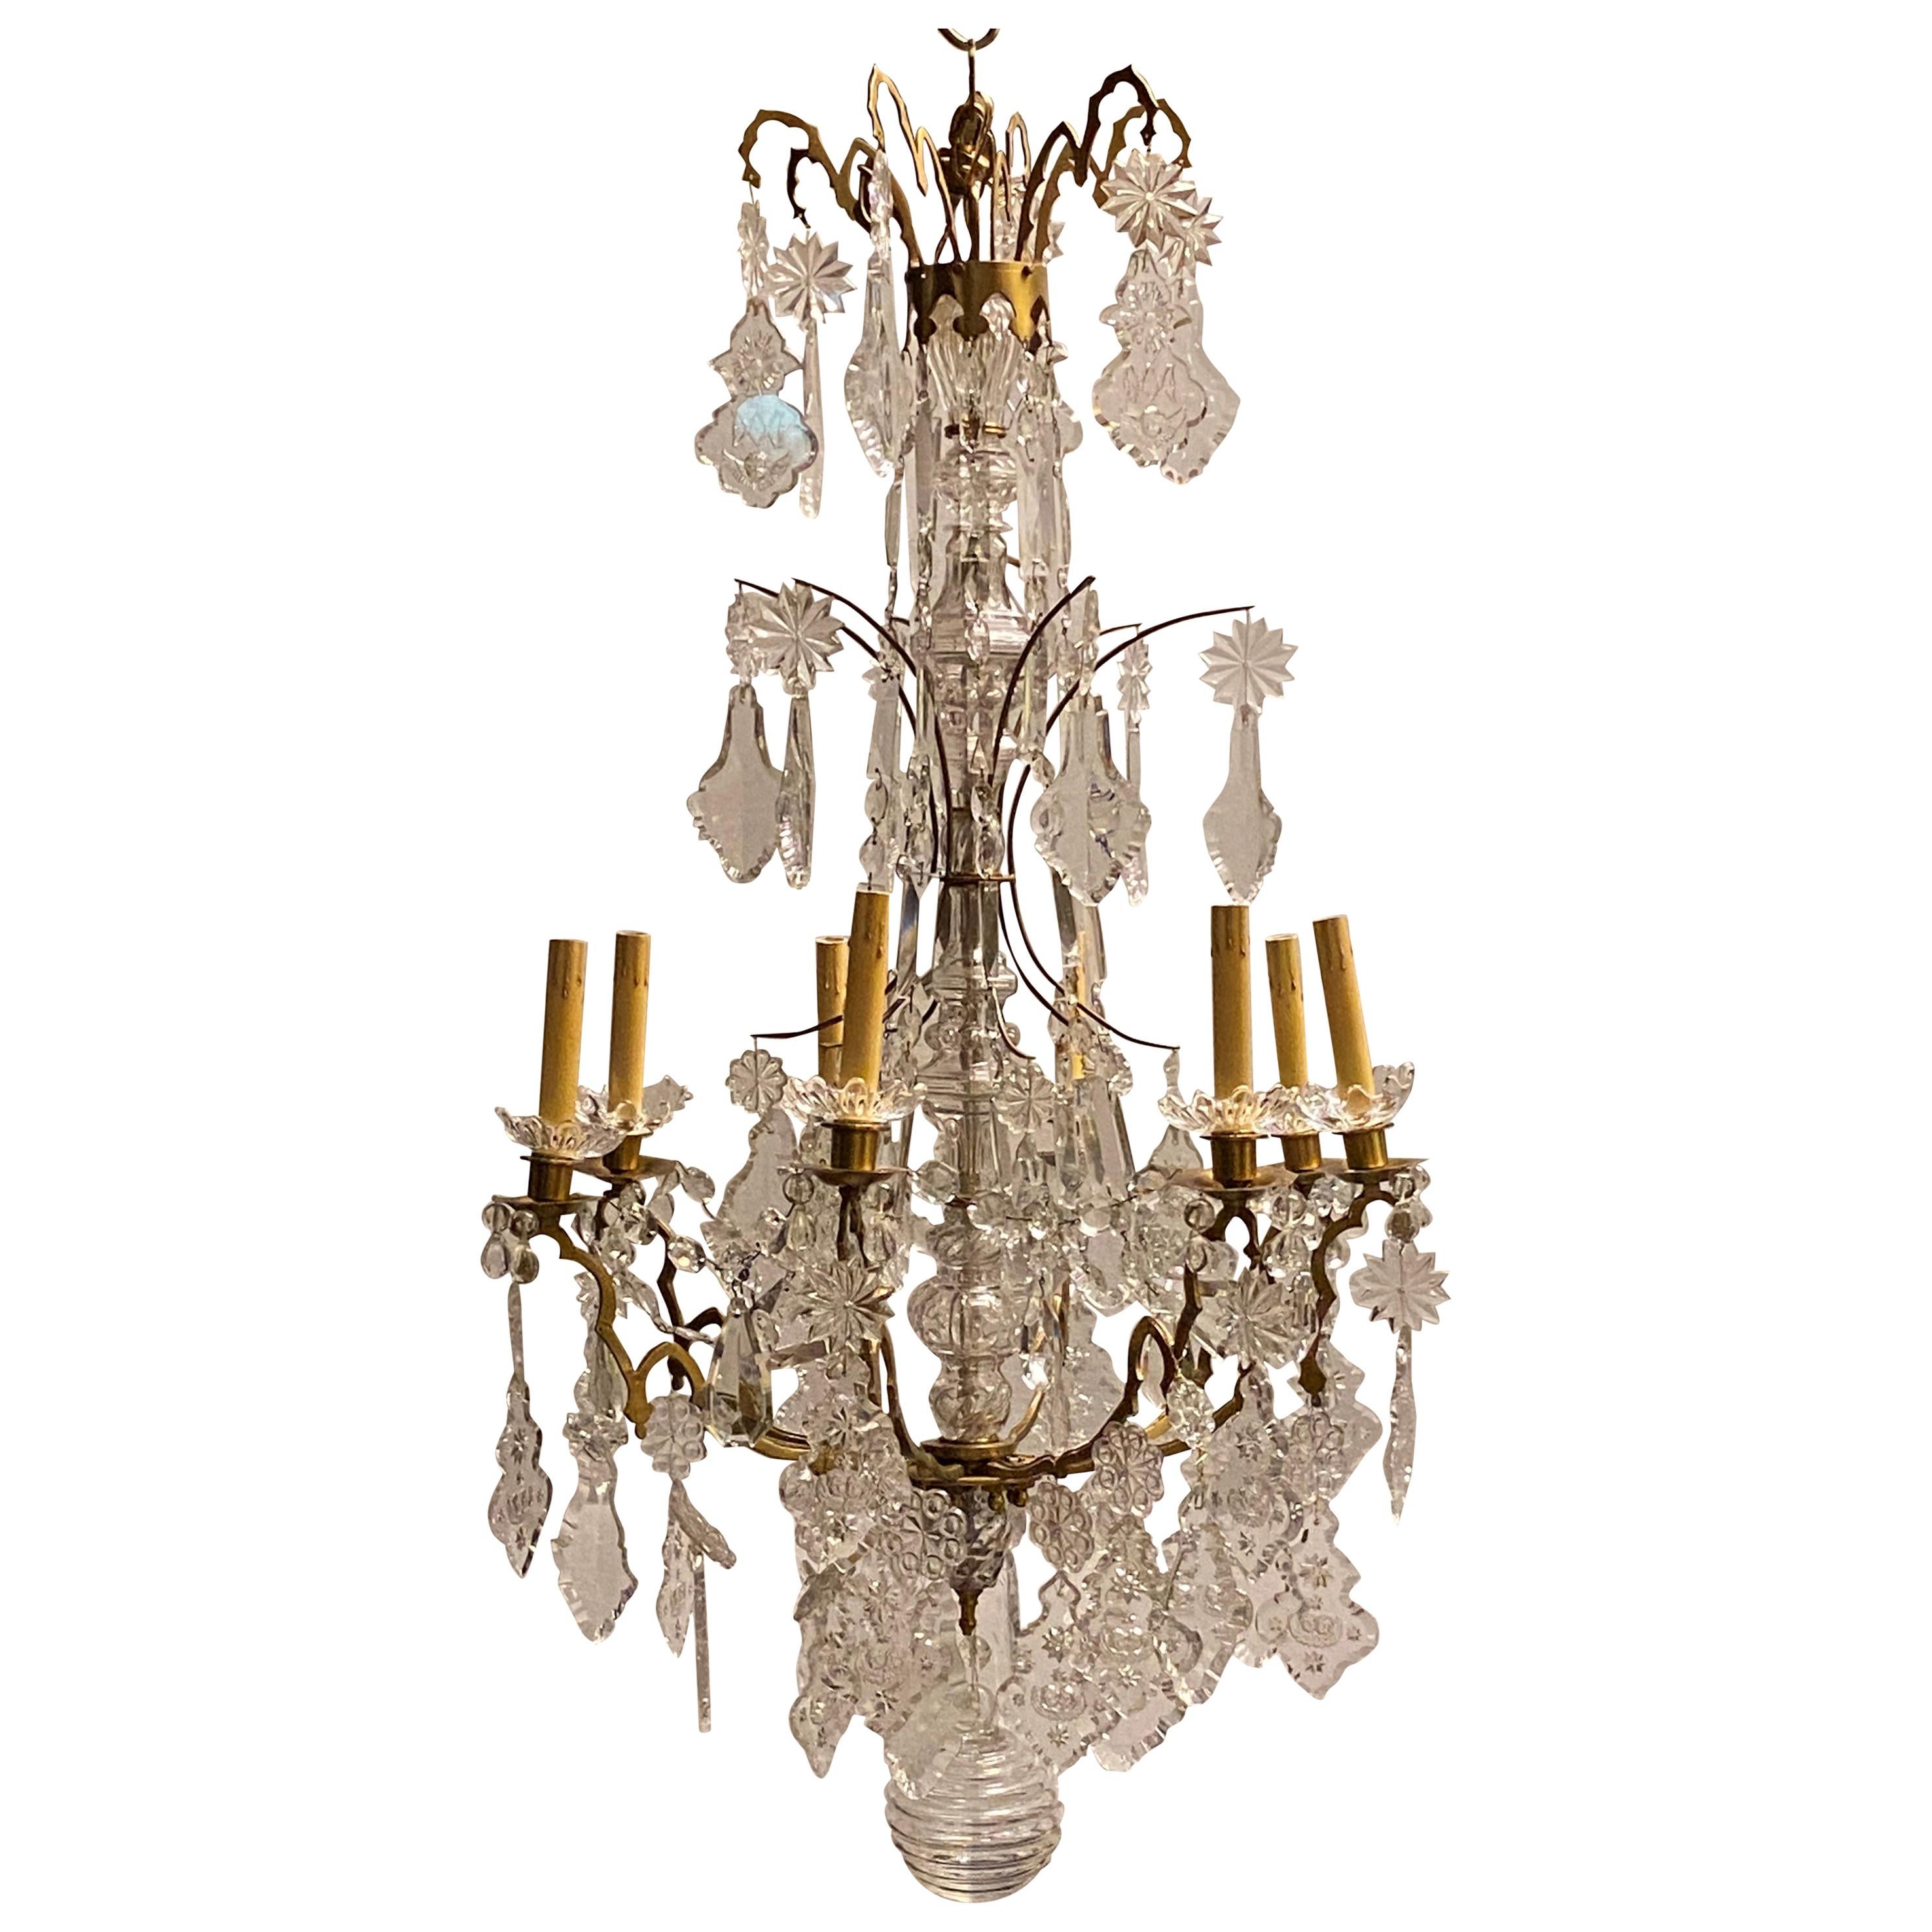 French Louis XVI Style Bronze and Crystal Chandelier Attributed to Baccarat